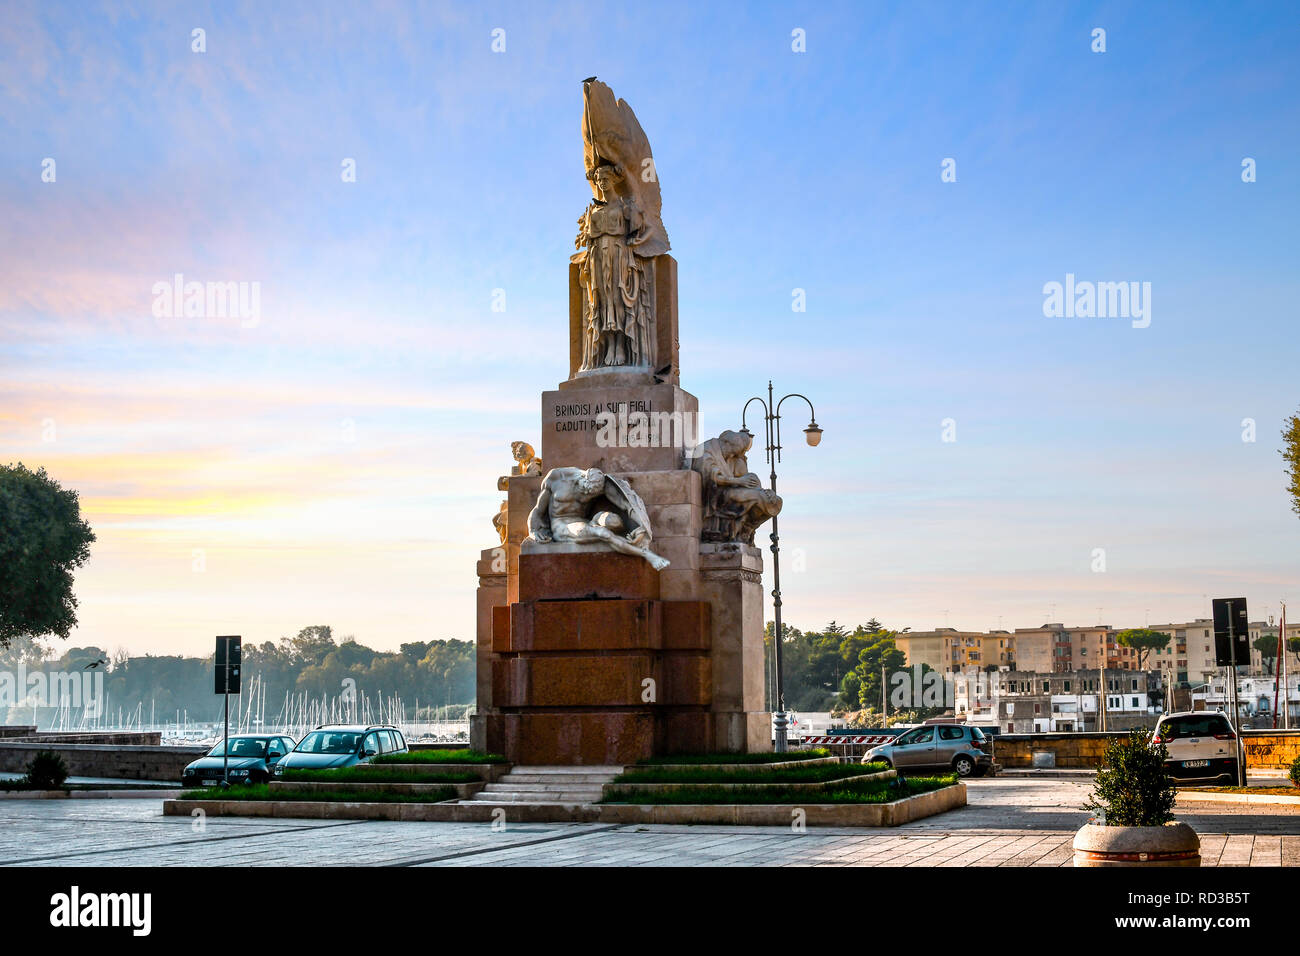 The Monument to the Fallen Soldiers of Brindisi during the First World War in the Piazza Santa Teresa in Brindisi, Italy Stock Photo